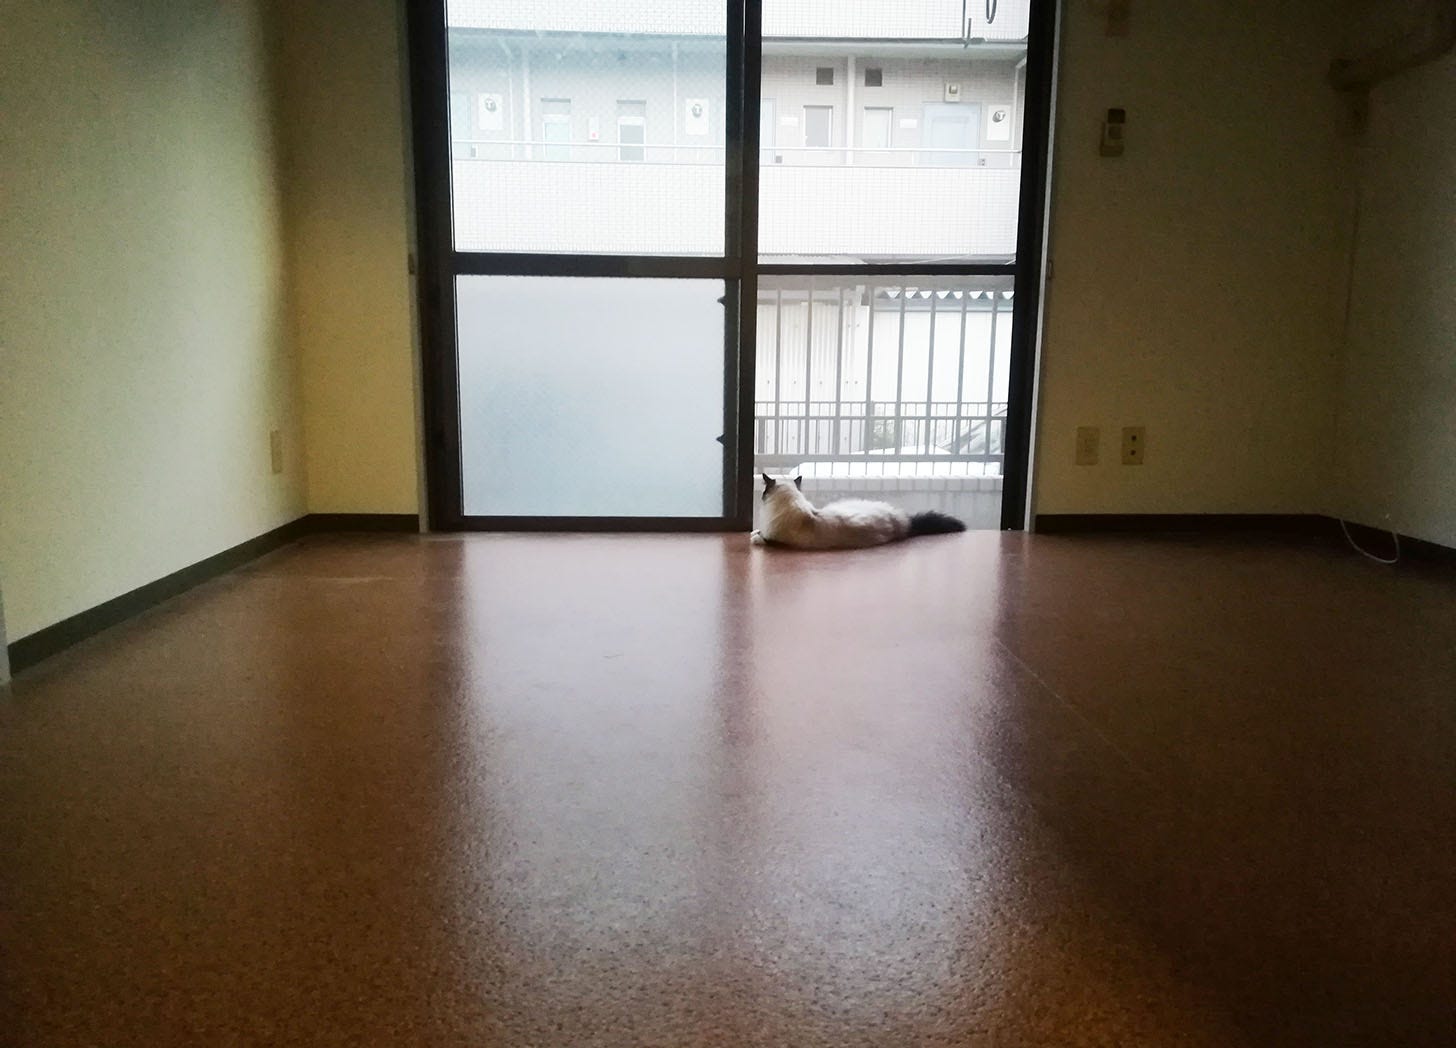 My cat, Dylan, looking through the balcony doors in a completely empty room.